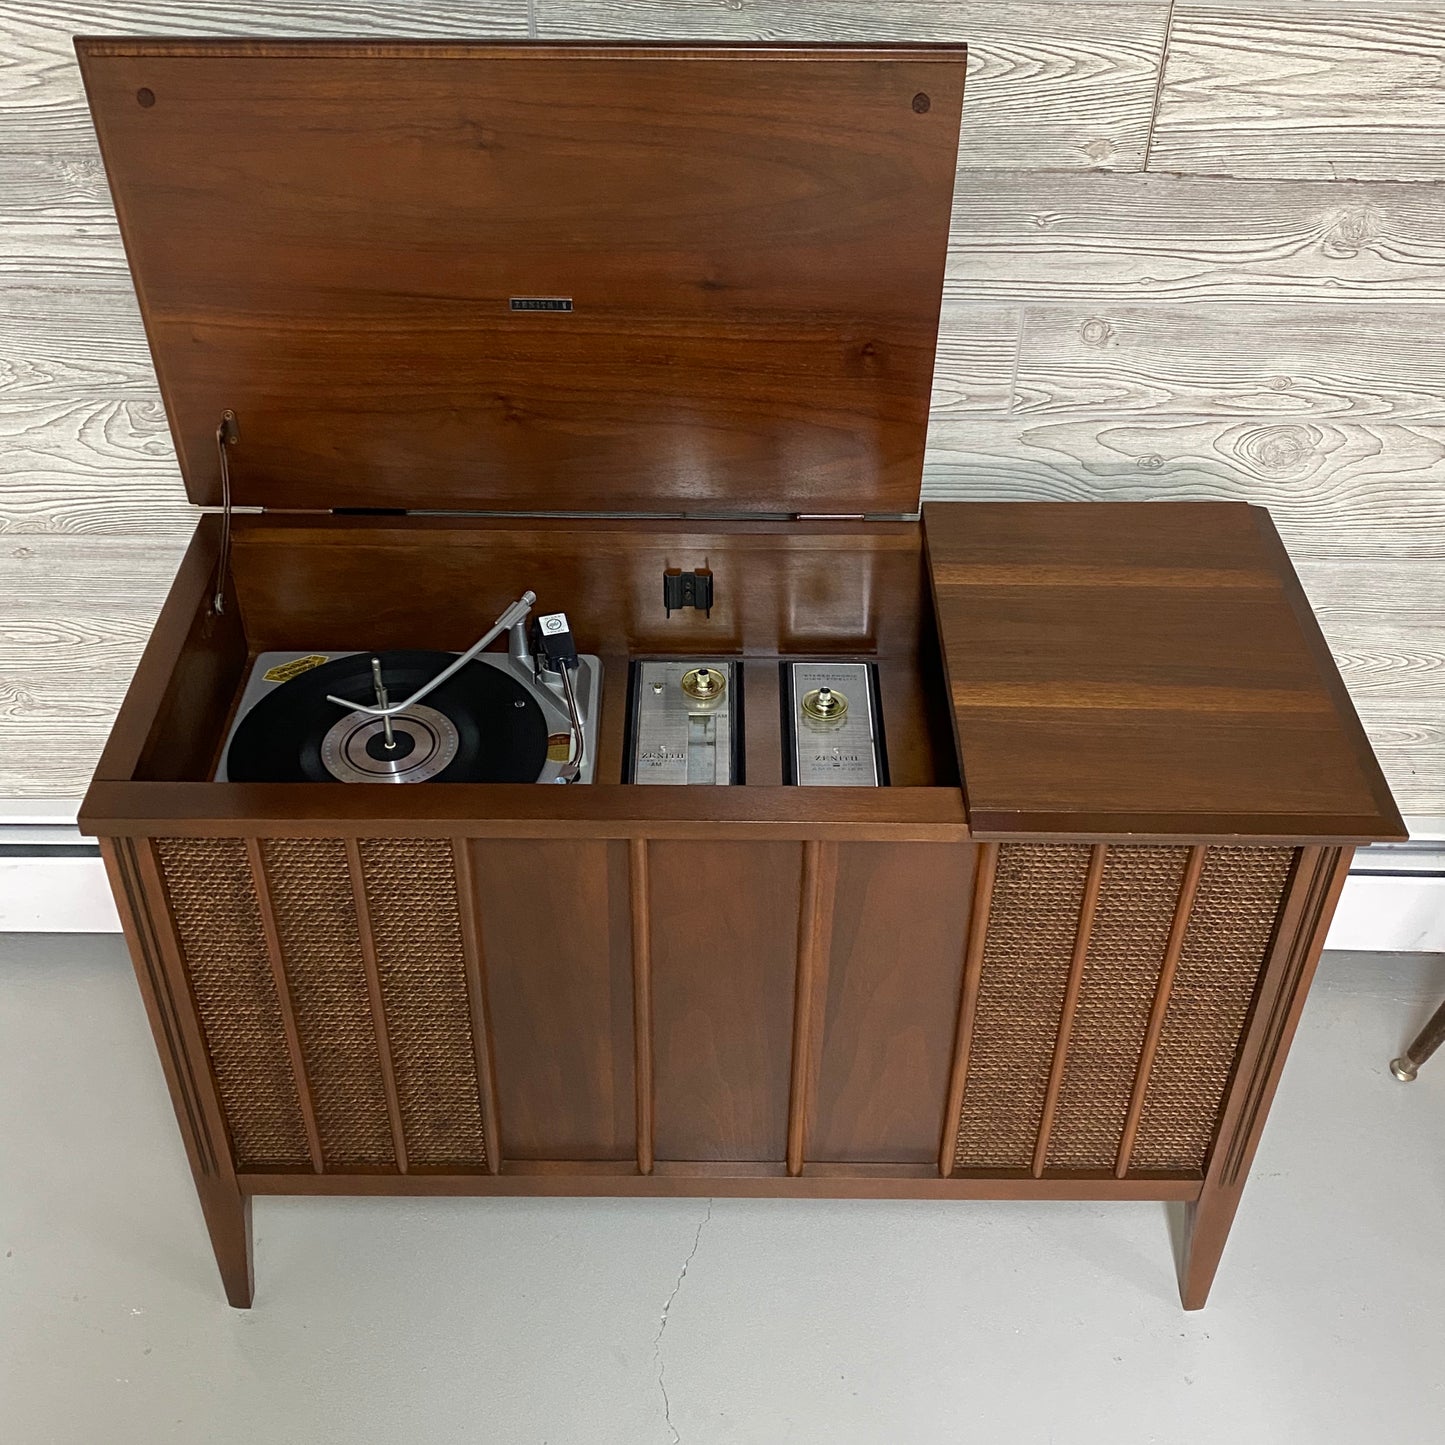 **SOLD OUT**  ZENITH 60s Vintage Stereo Console Record Player Changer AM FM Bluetooth Alexa The Vintedge Co.